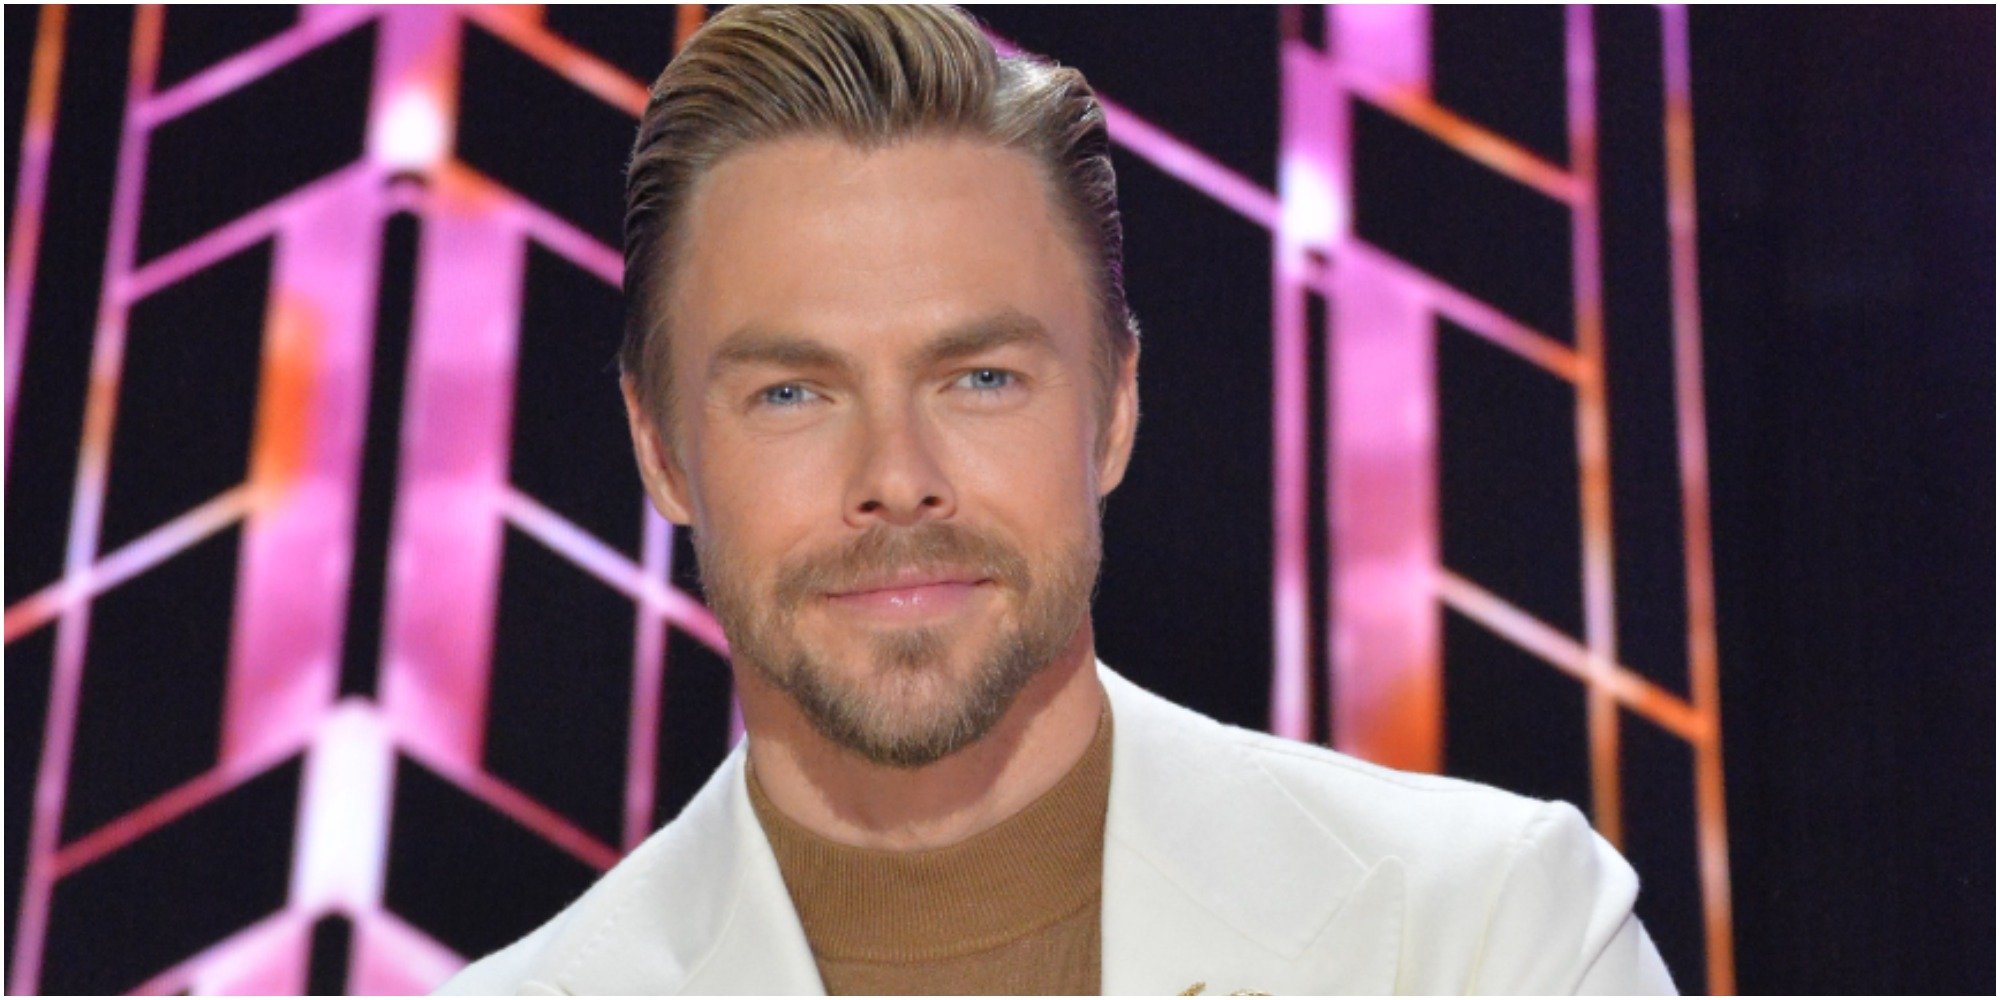 Derek Hough already has his eye on several contestants who he thinks are "Dancing WIth the Stars" frontrunners for season 30.